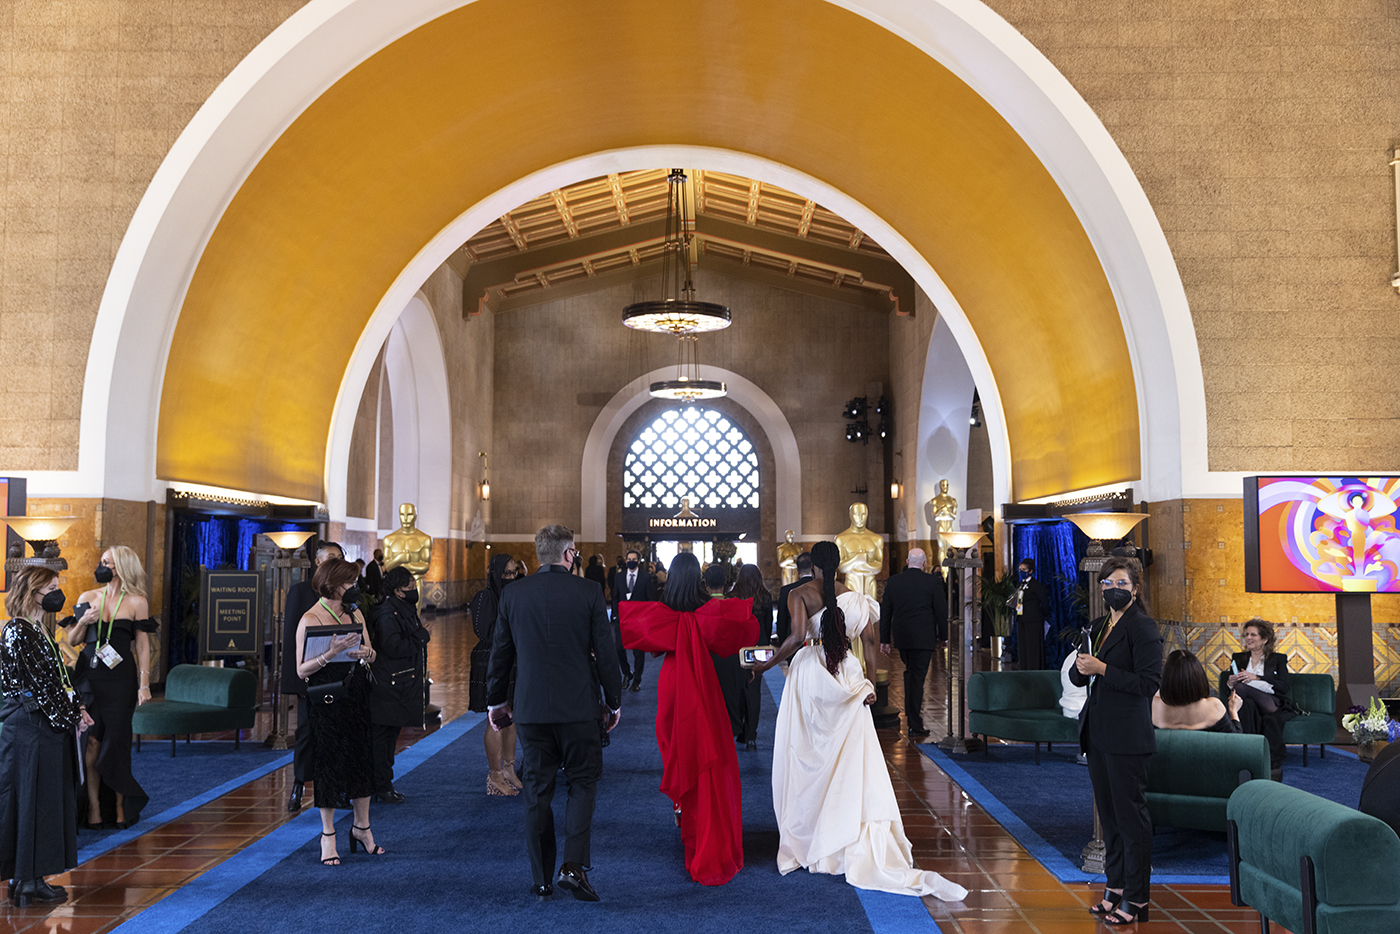 Oscars 2021: Why the awards show moving to Union Station isn't weird